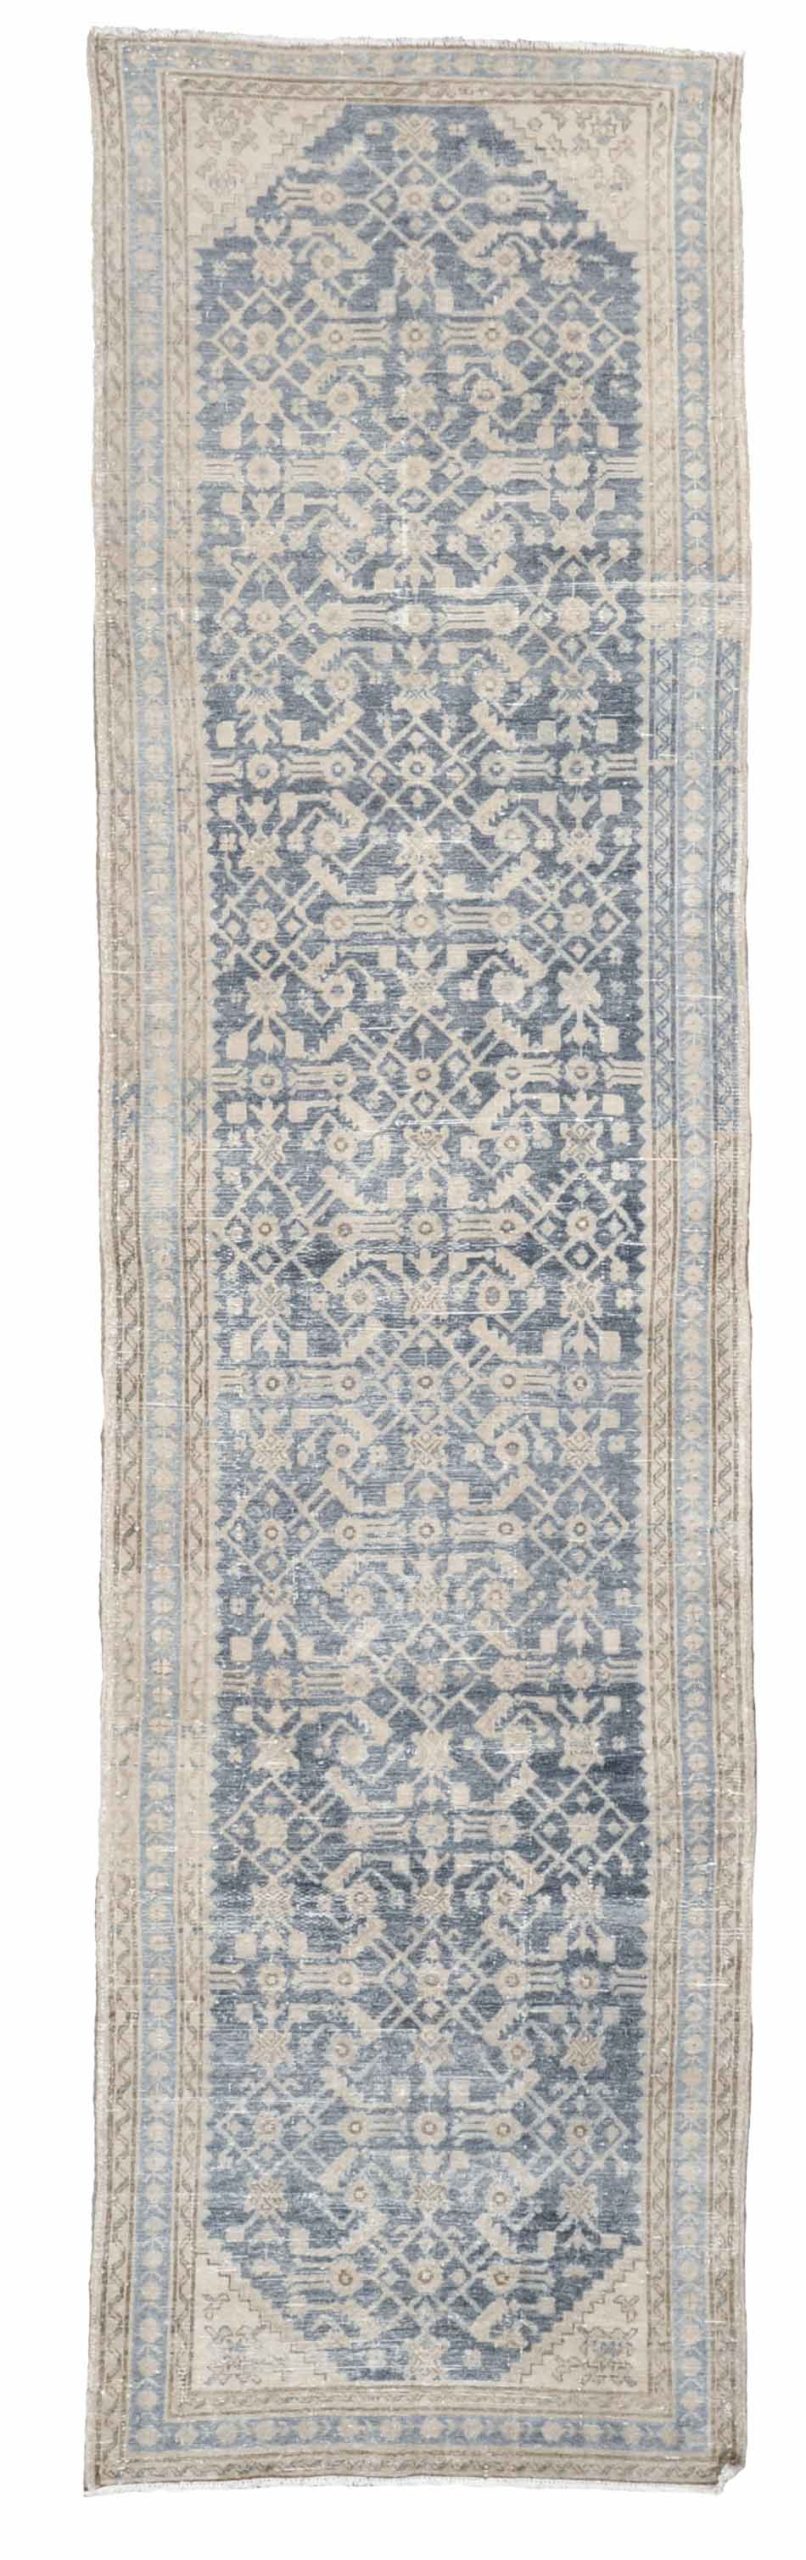 Rugs and More-Vintage Persian Rug